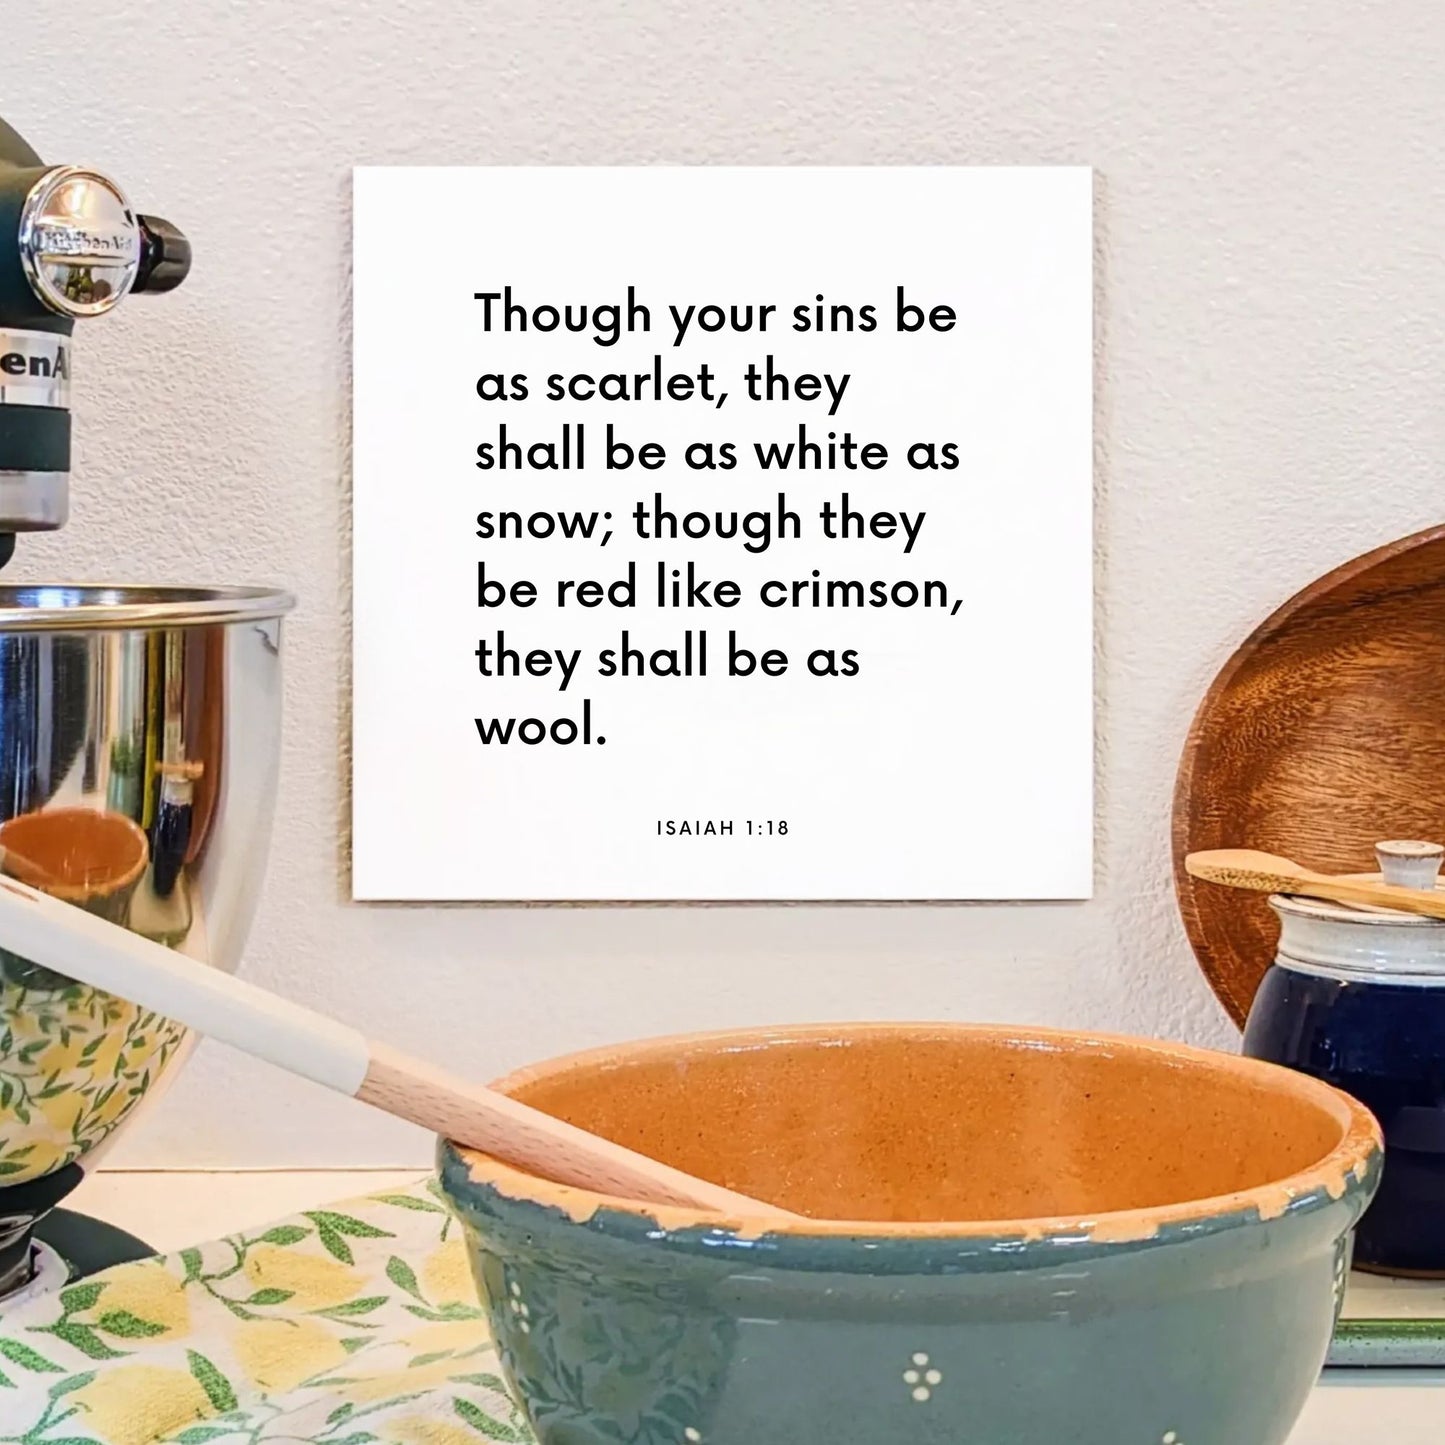 Kitchen mouting of the scripture tile for Isaiah 1:18 - "Though your sins be as scarlet, they shall be white as snow"